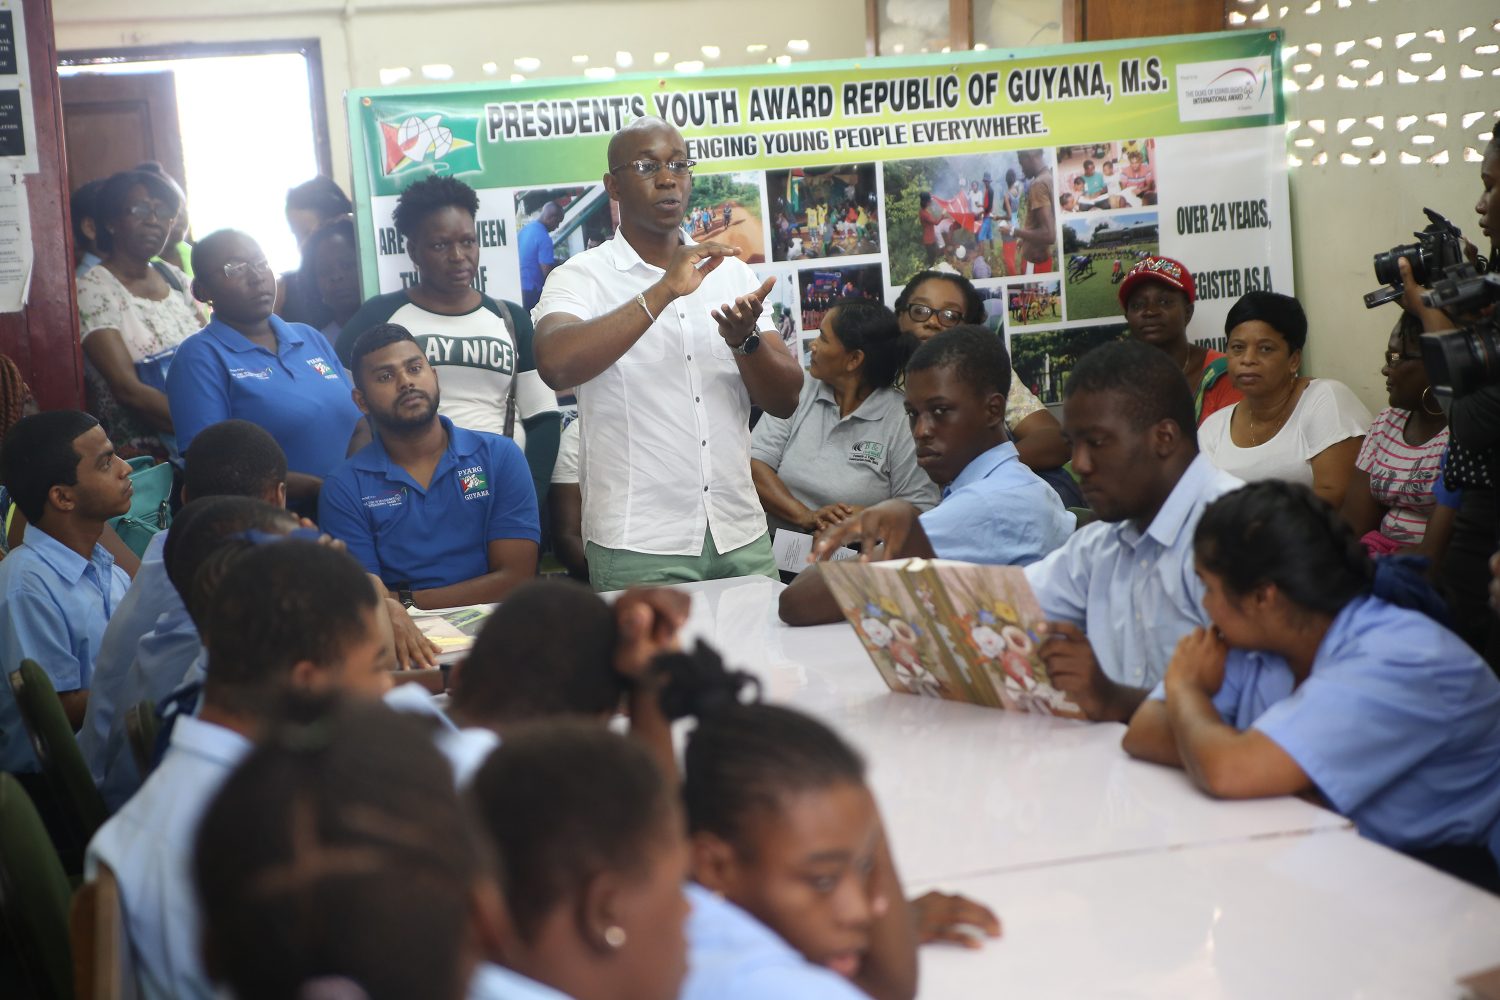 Executive Officer of the President’s Youth Award Programme Dr Allister Collins speaking to students and parents at the Open Doors Centre about the youth programme yesterday (Keno George photo)